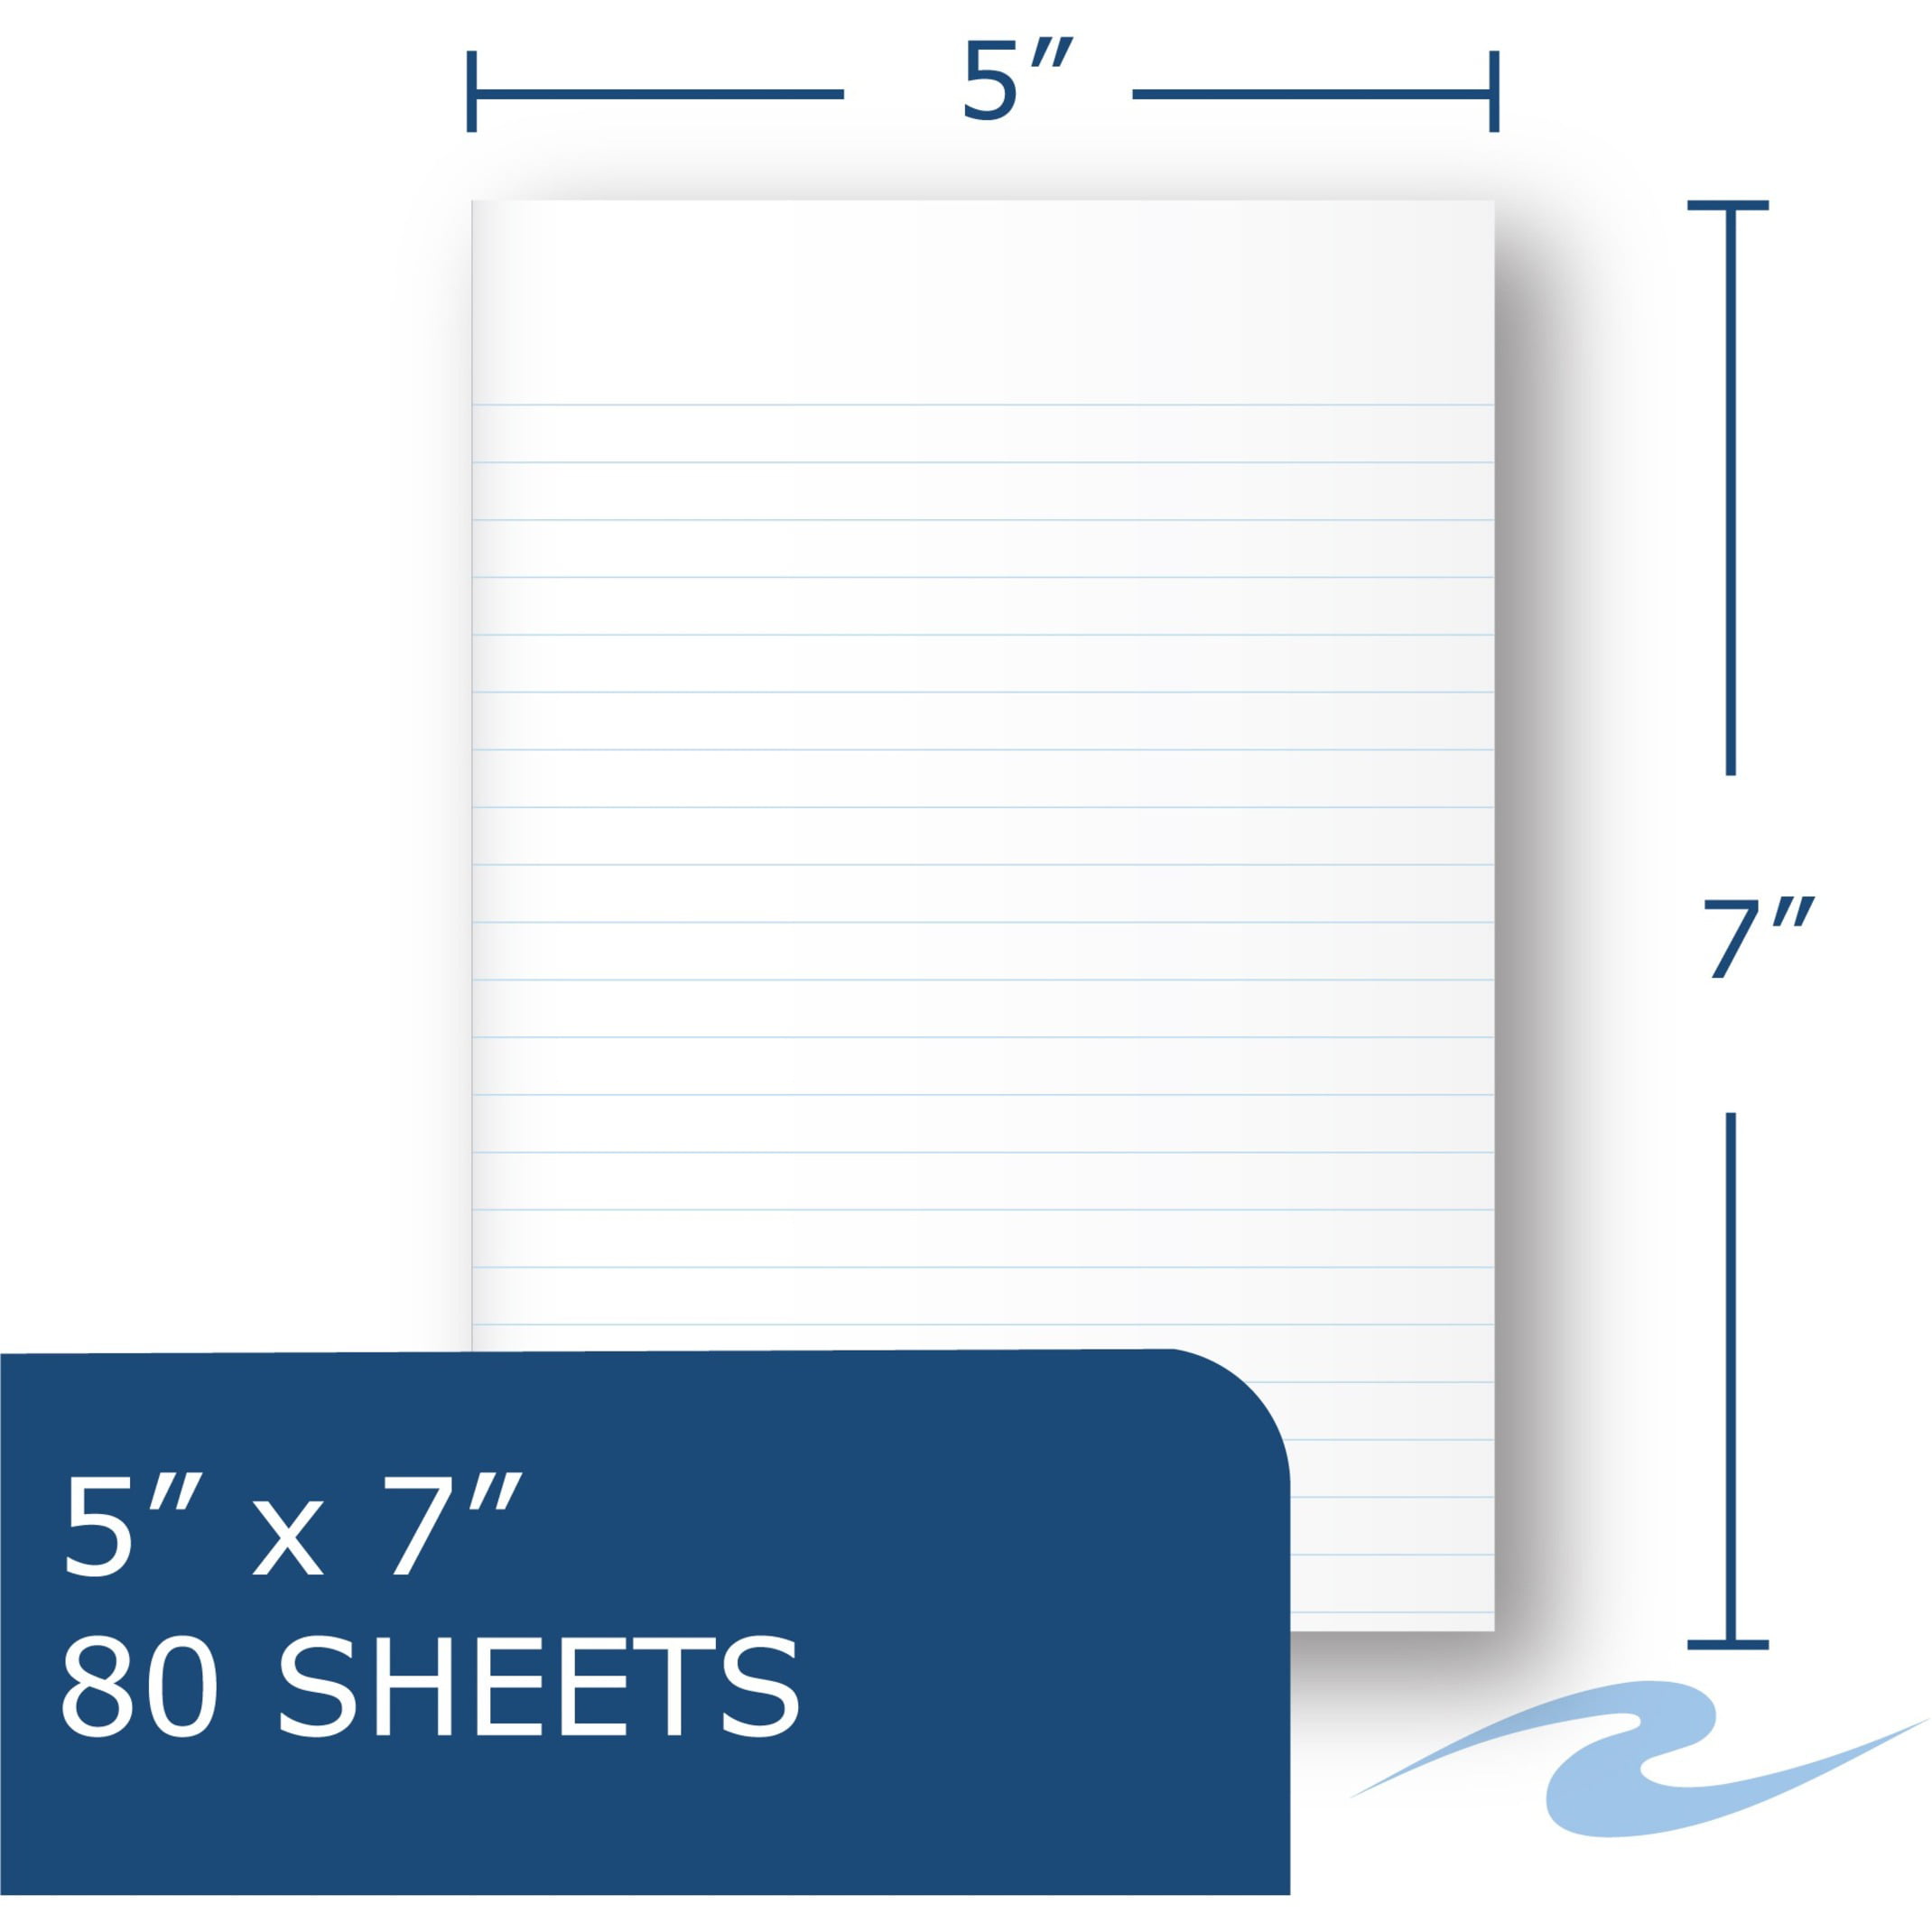 921212-1 Roaring Spring Notebook: Quadrille, Wirebound, 50 Sheets, 0 Carbon  Sheets, Left, White, Kraft